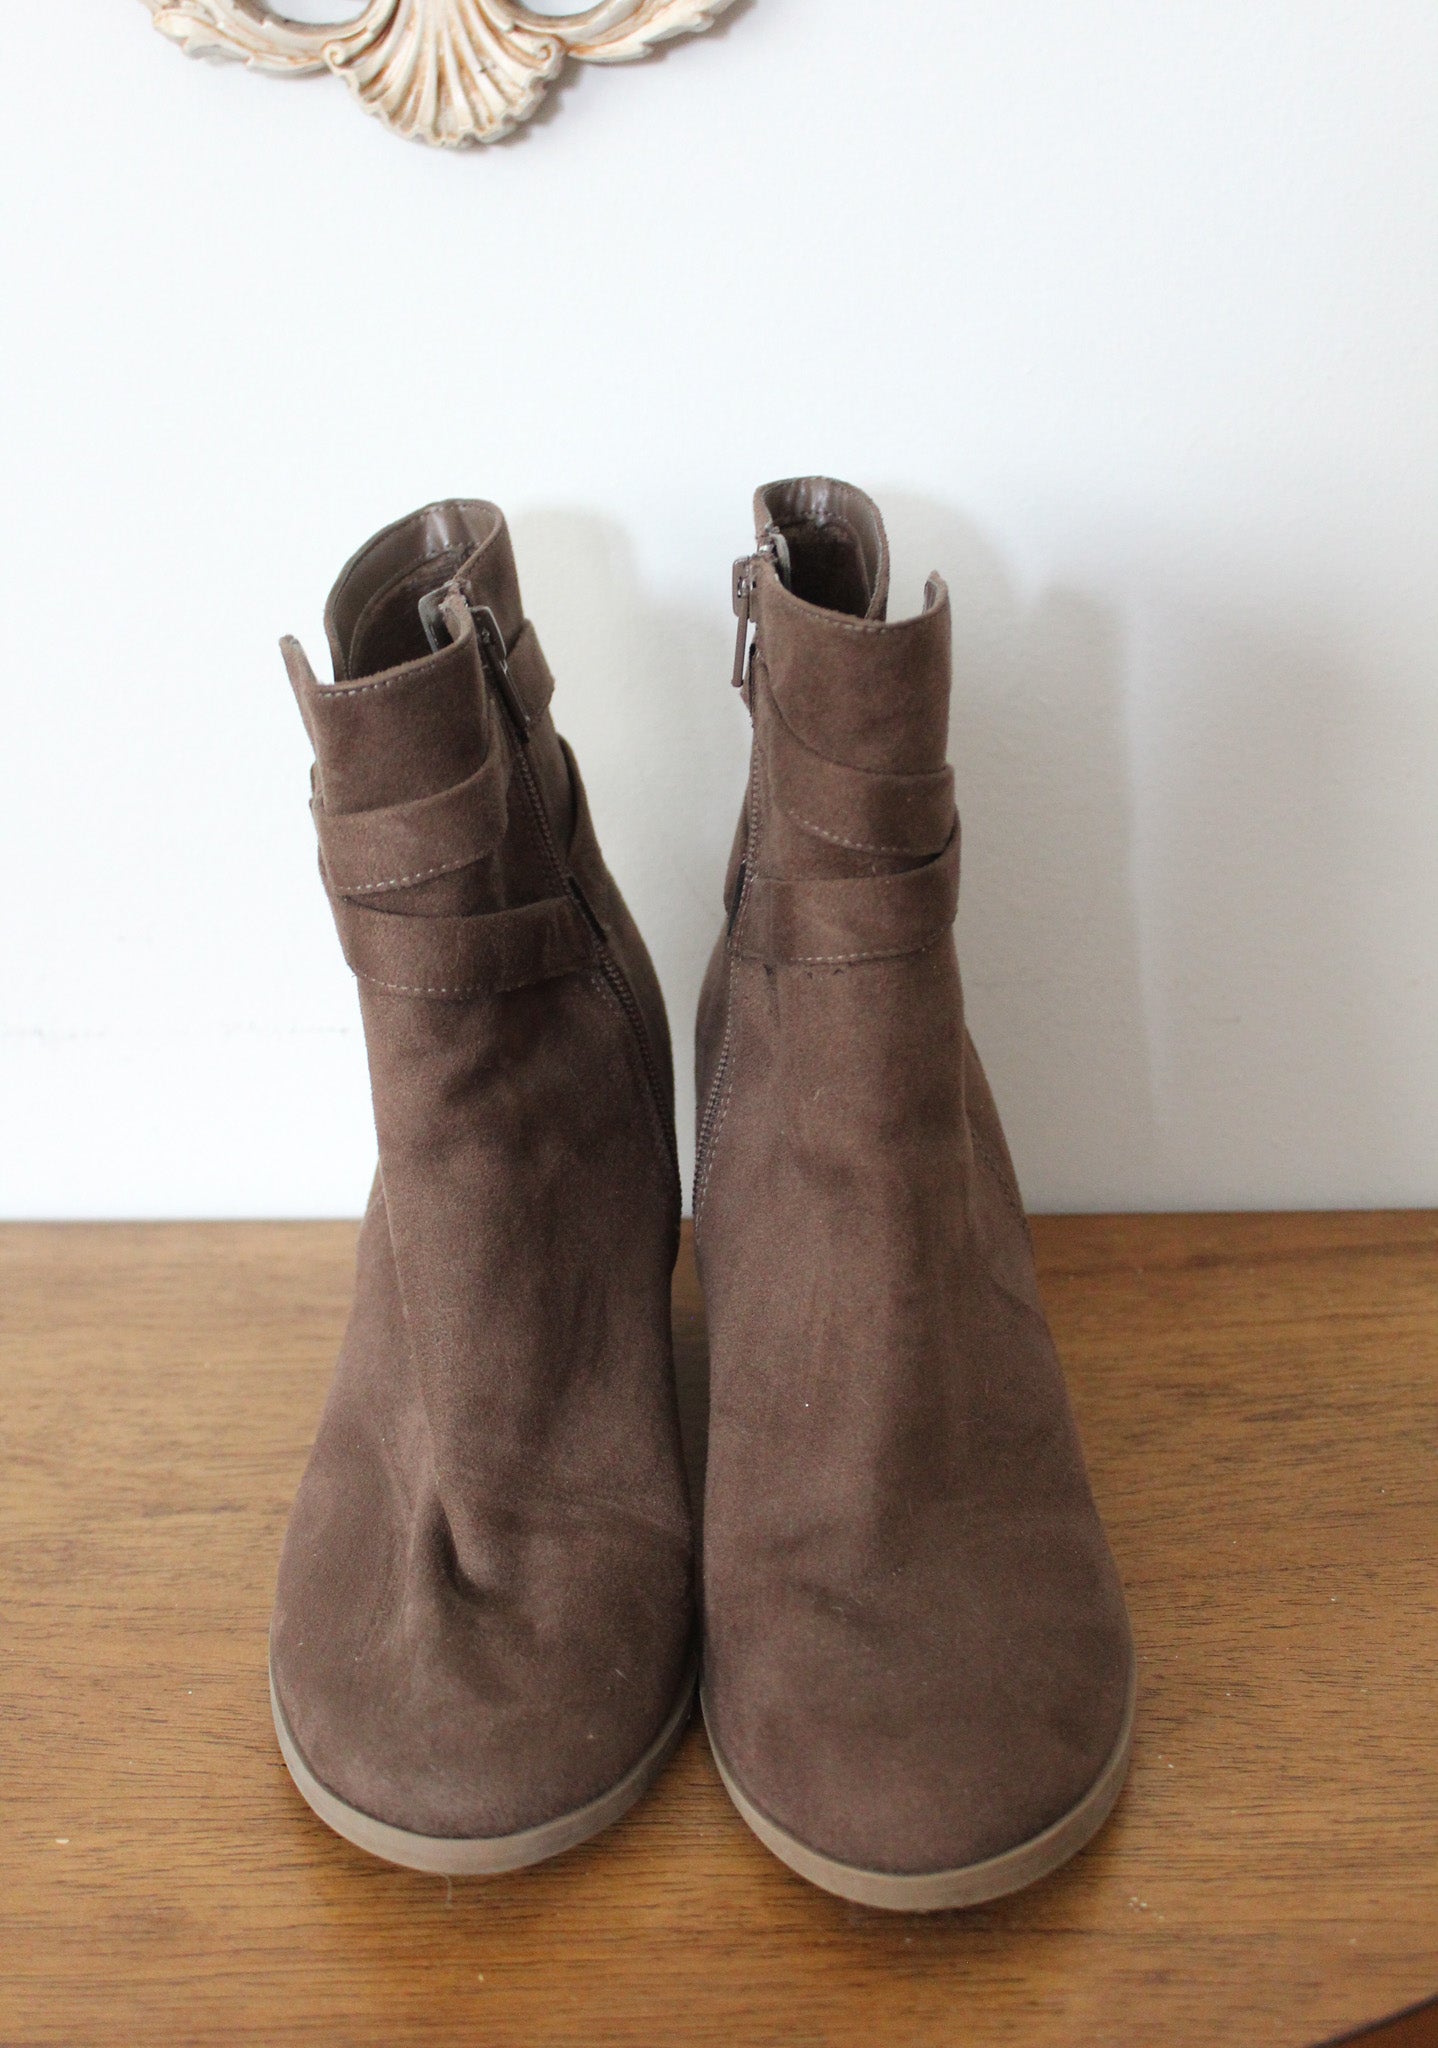 AMERICAN EAGLE BROWN ANKLE BOOTS SIZE 8.5